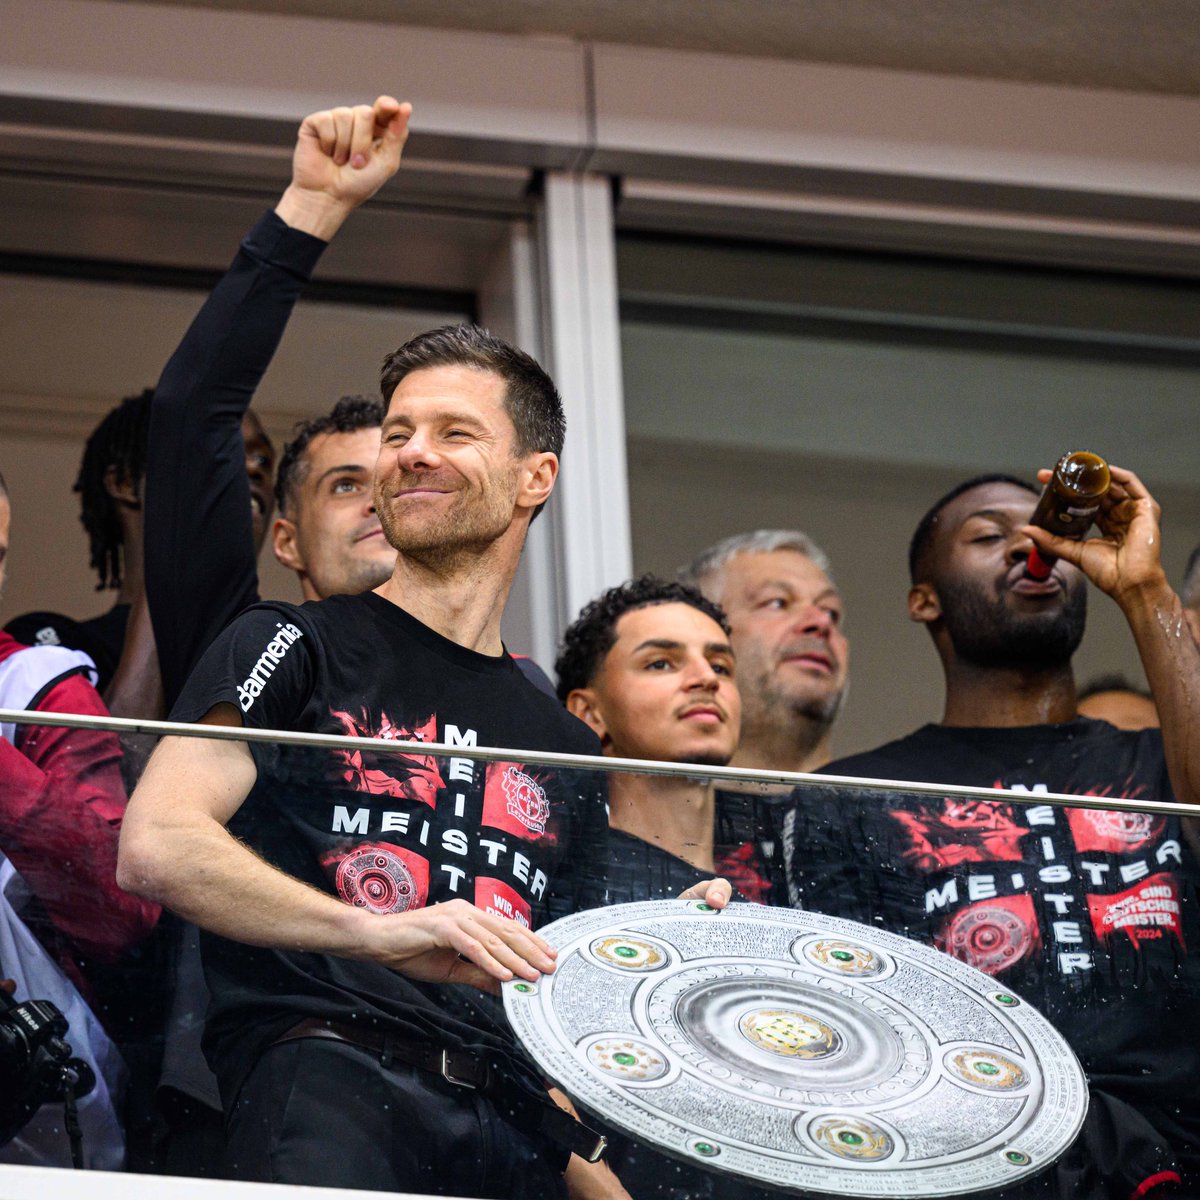 🔴⚫️🏆 First Bundesliga title in 120 years for Bayer Leverkusen. Xabi: “This is a very special moment for the club. Winning the Bundesliga for the first time in 120 years is something very special. The players are top. I am very proud of everyone”.